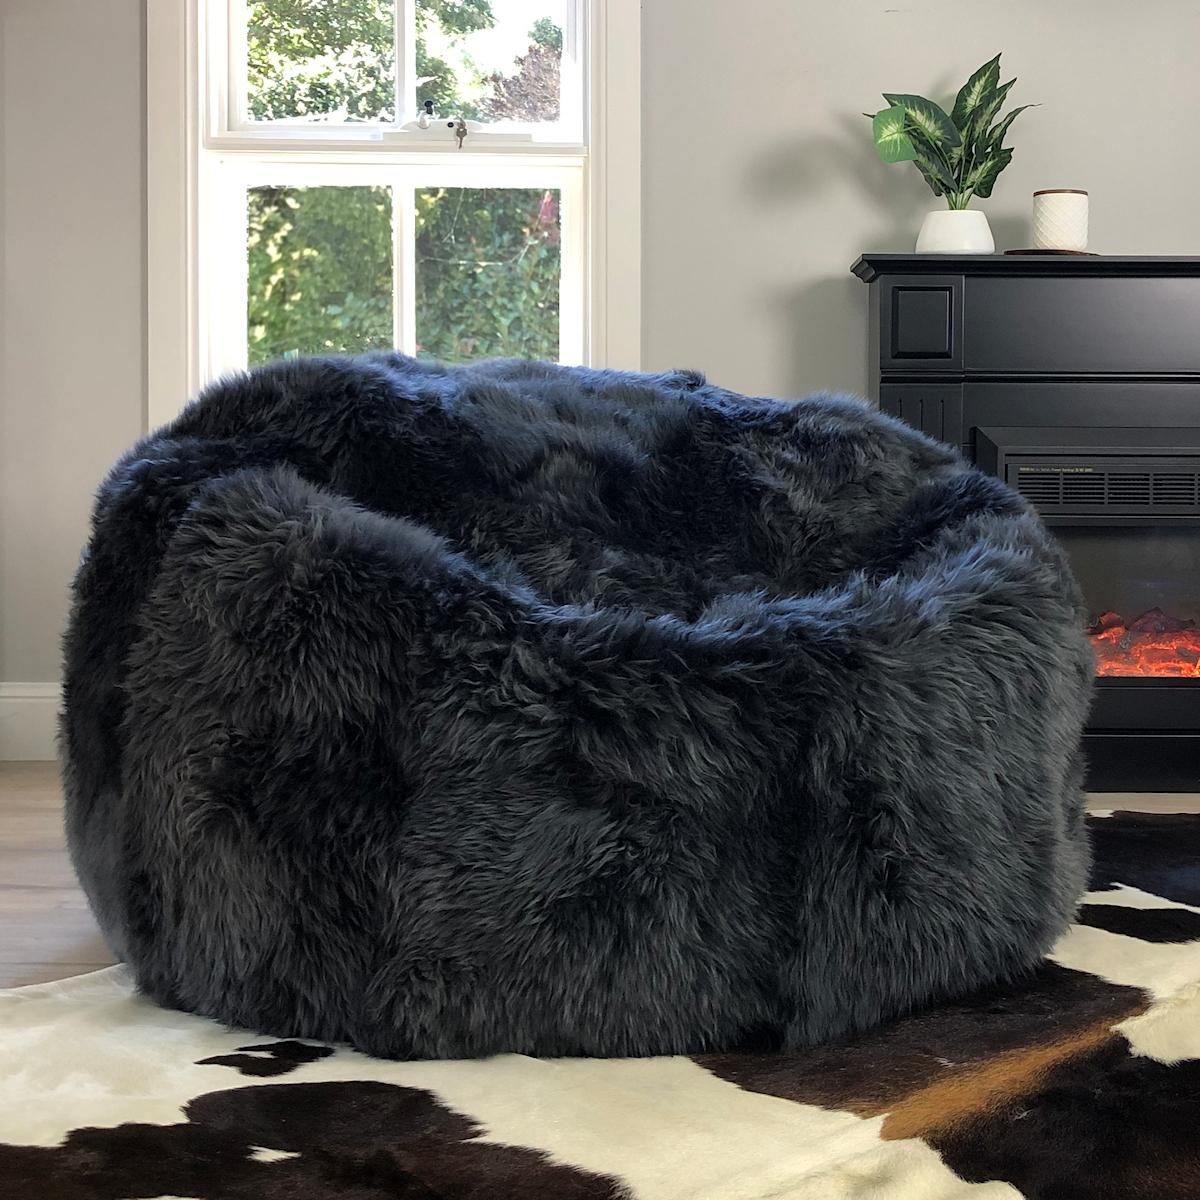 This long wool grey sheepskin bean bag chair cover is the must-have shaggy bean bag for anyone who wants to live in ultimate comfort. Australian, Merino sheepskin is a world class natural wool known for its superior qualities. 

Merino sheepskin